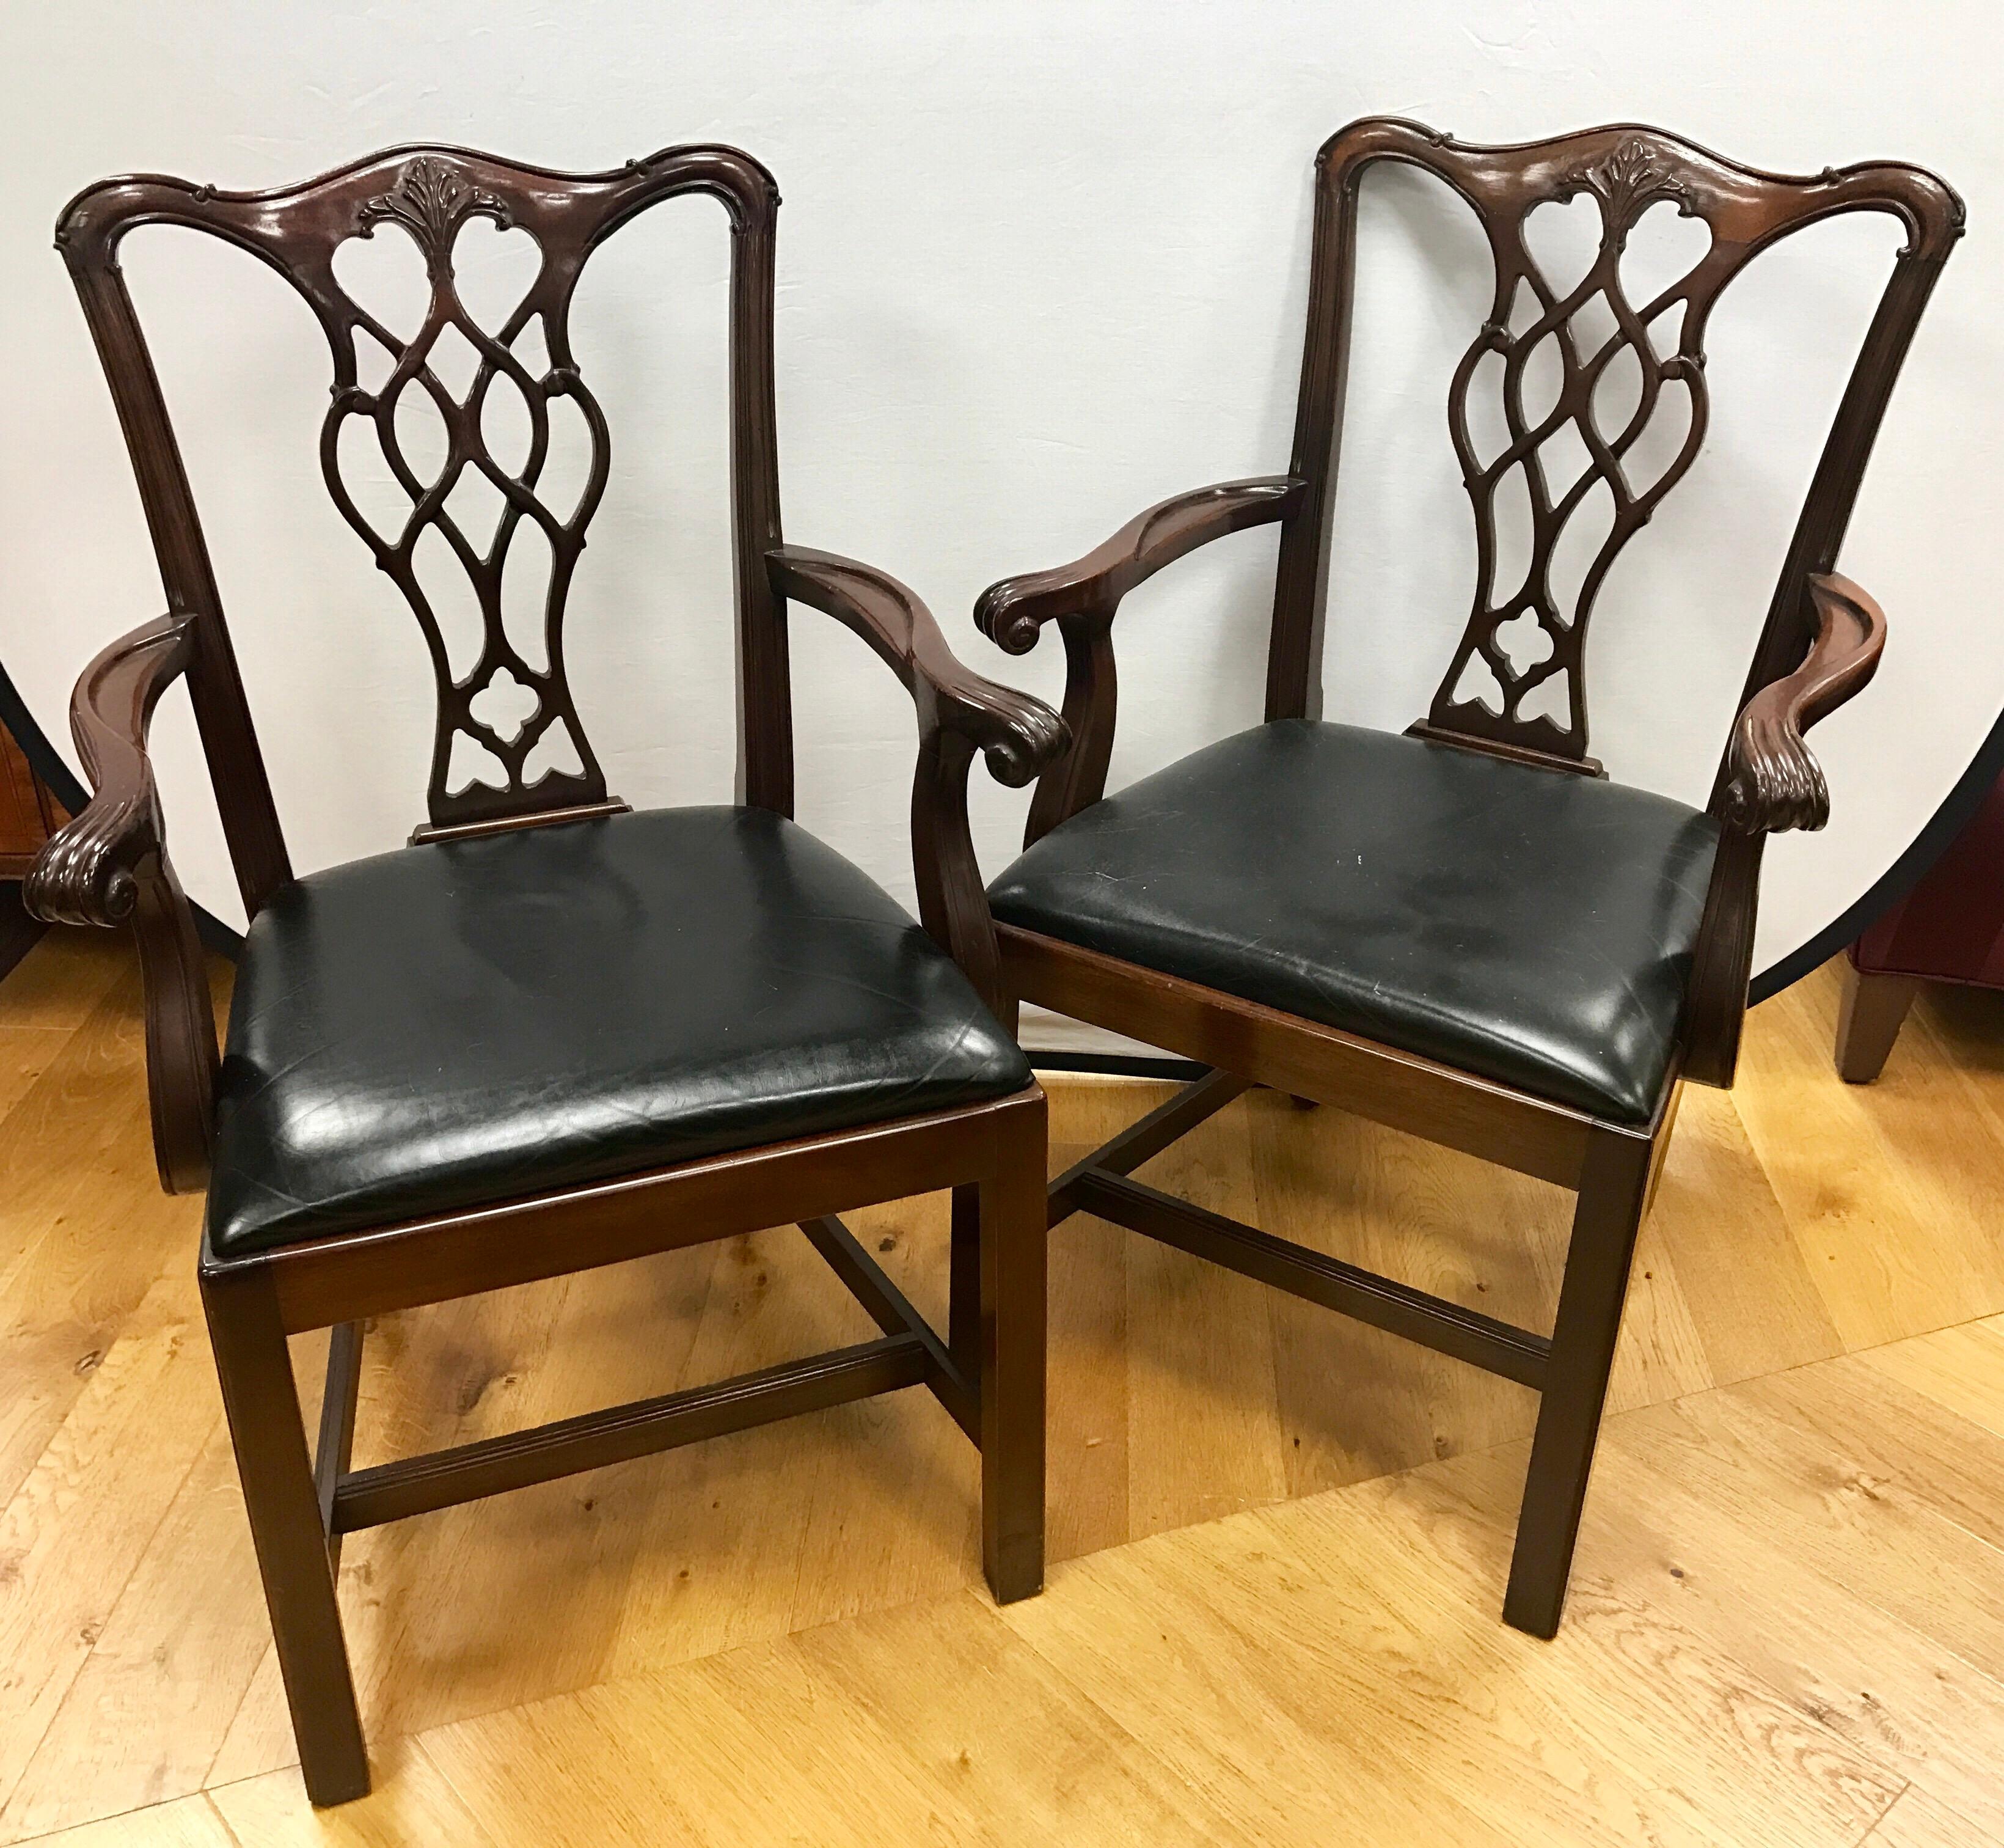 Elegant set of matching Chippendale vintage mahogany armchairs with black vinyl seat cushions.
 